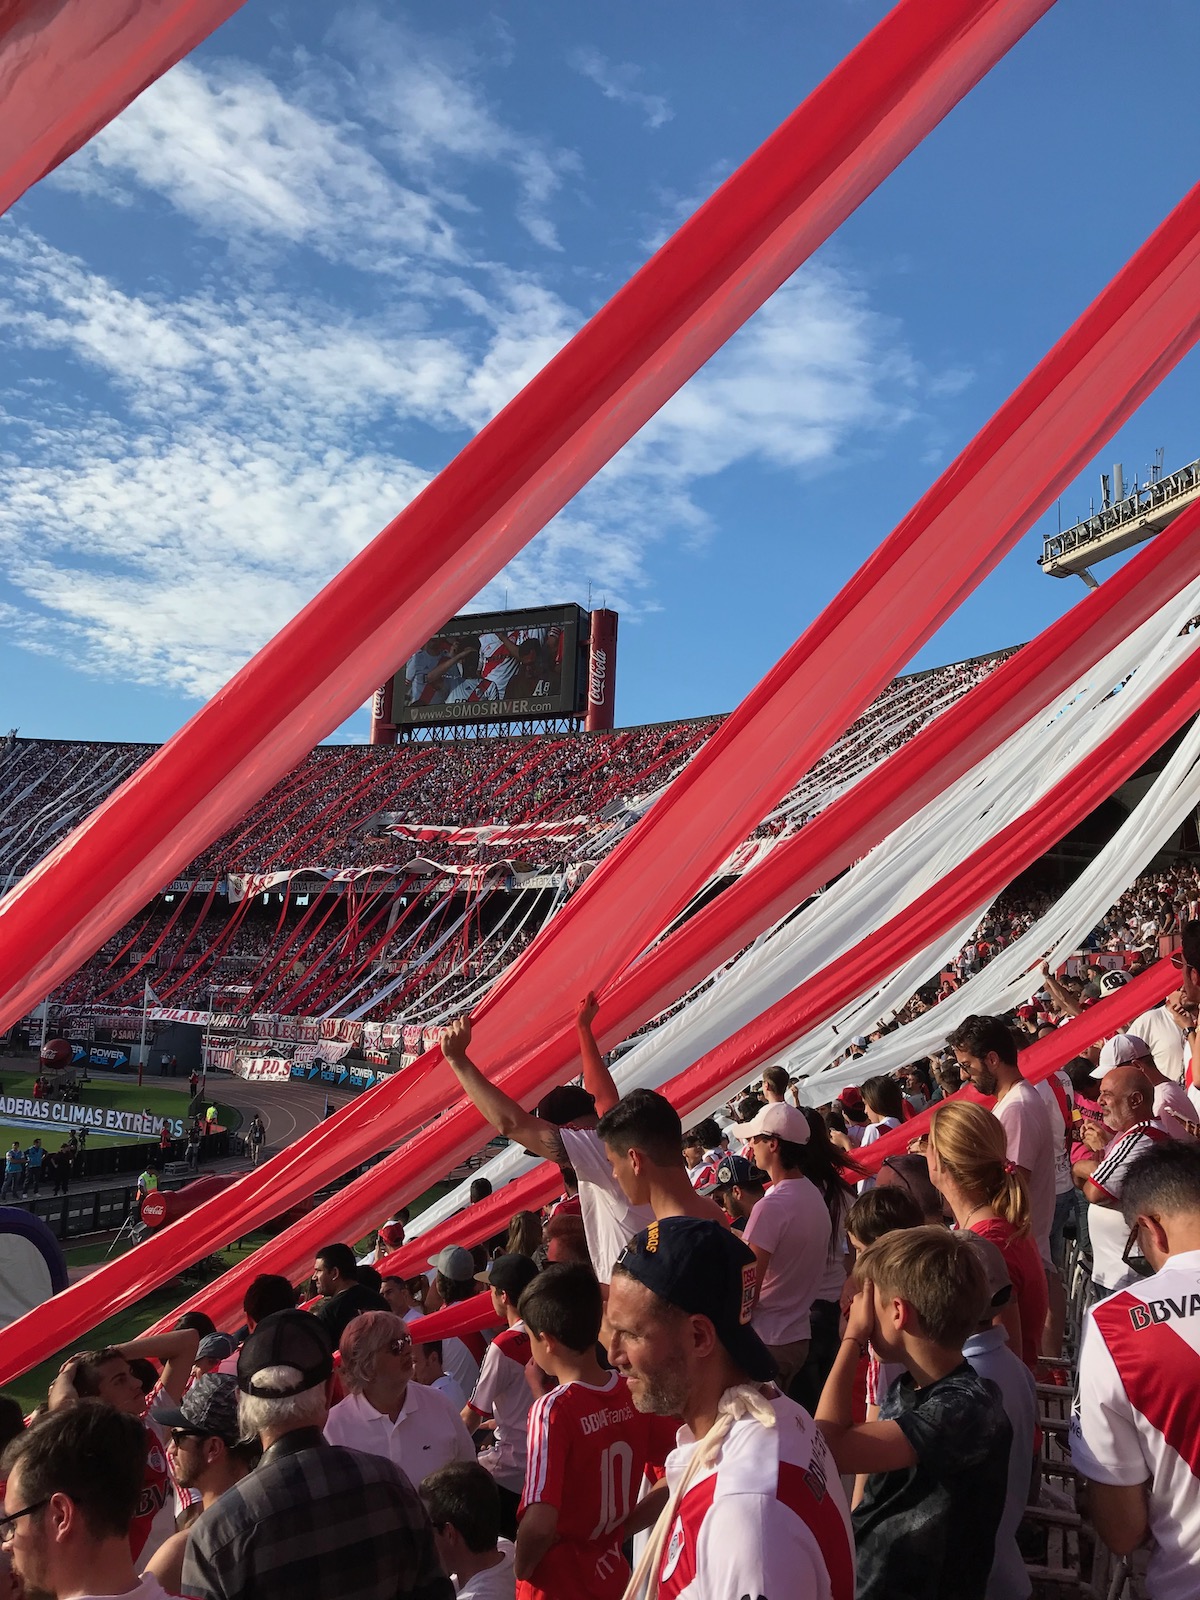 Red and white flares dangle below football fans in a packed stadium in Buenos Aires